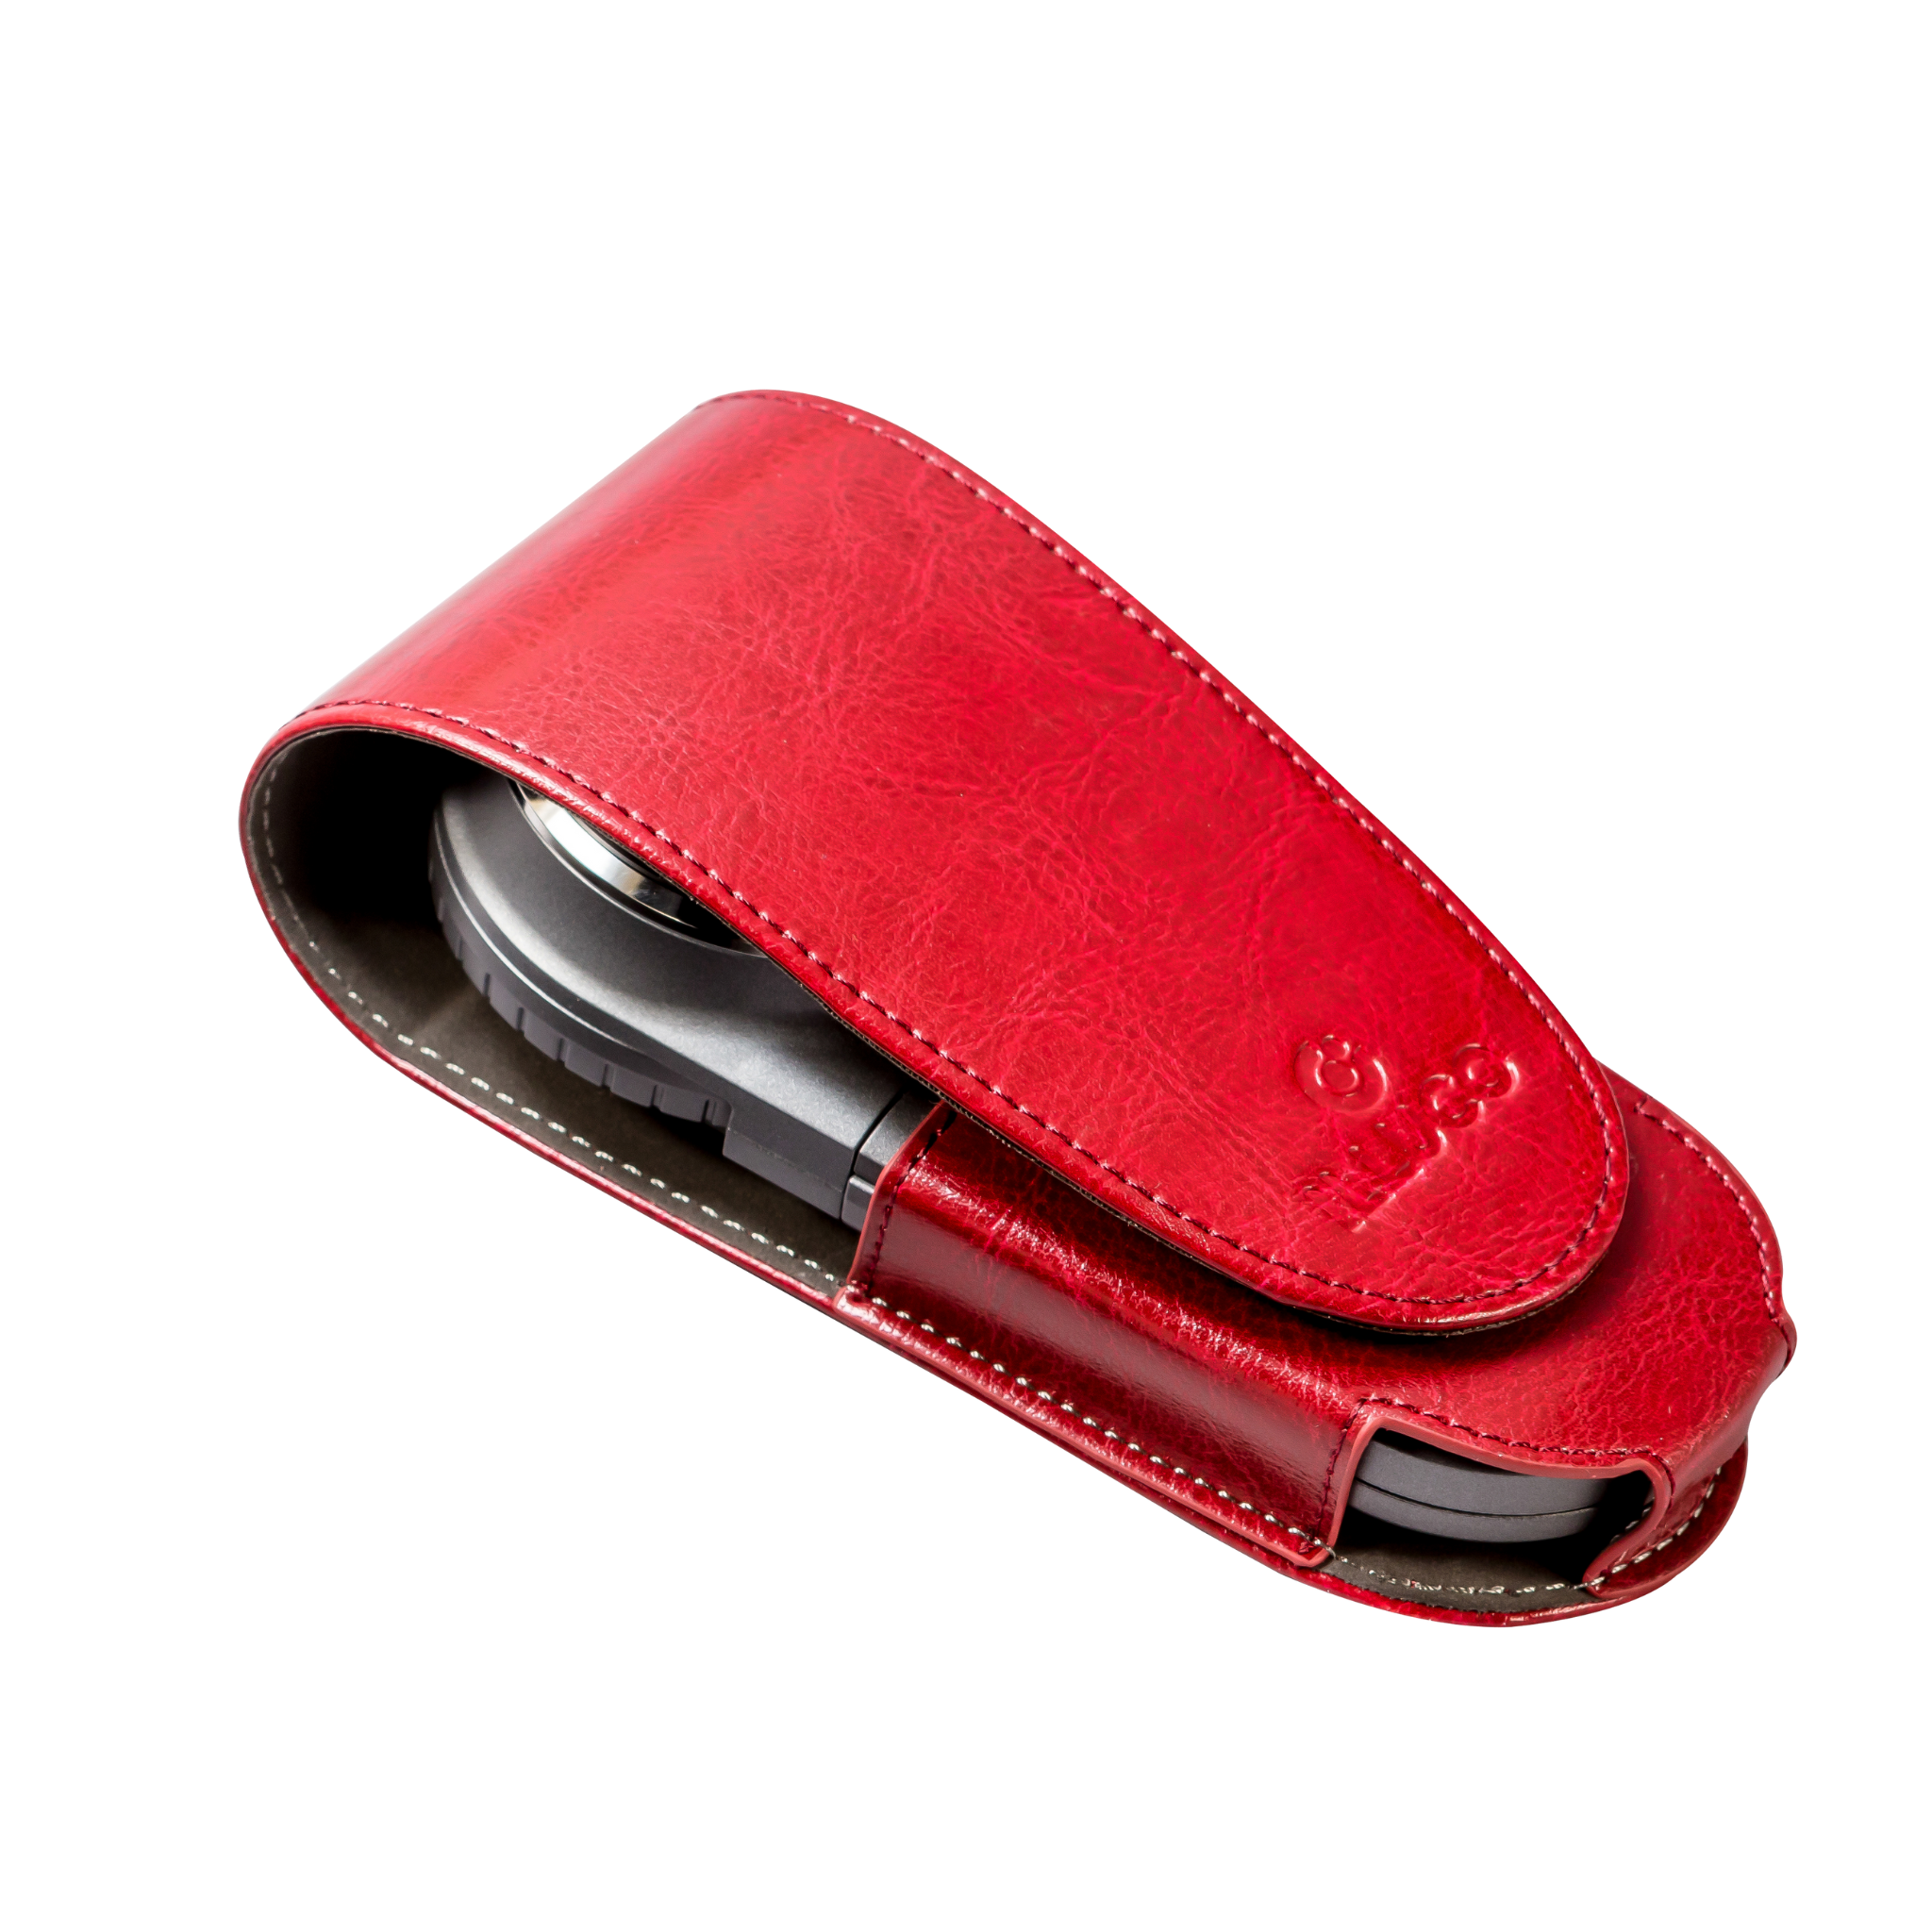 Illuco Leather Pouch in red